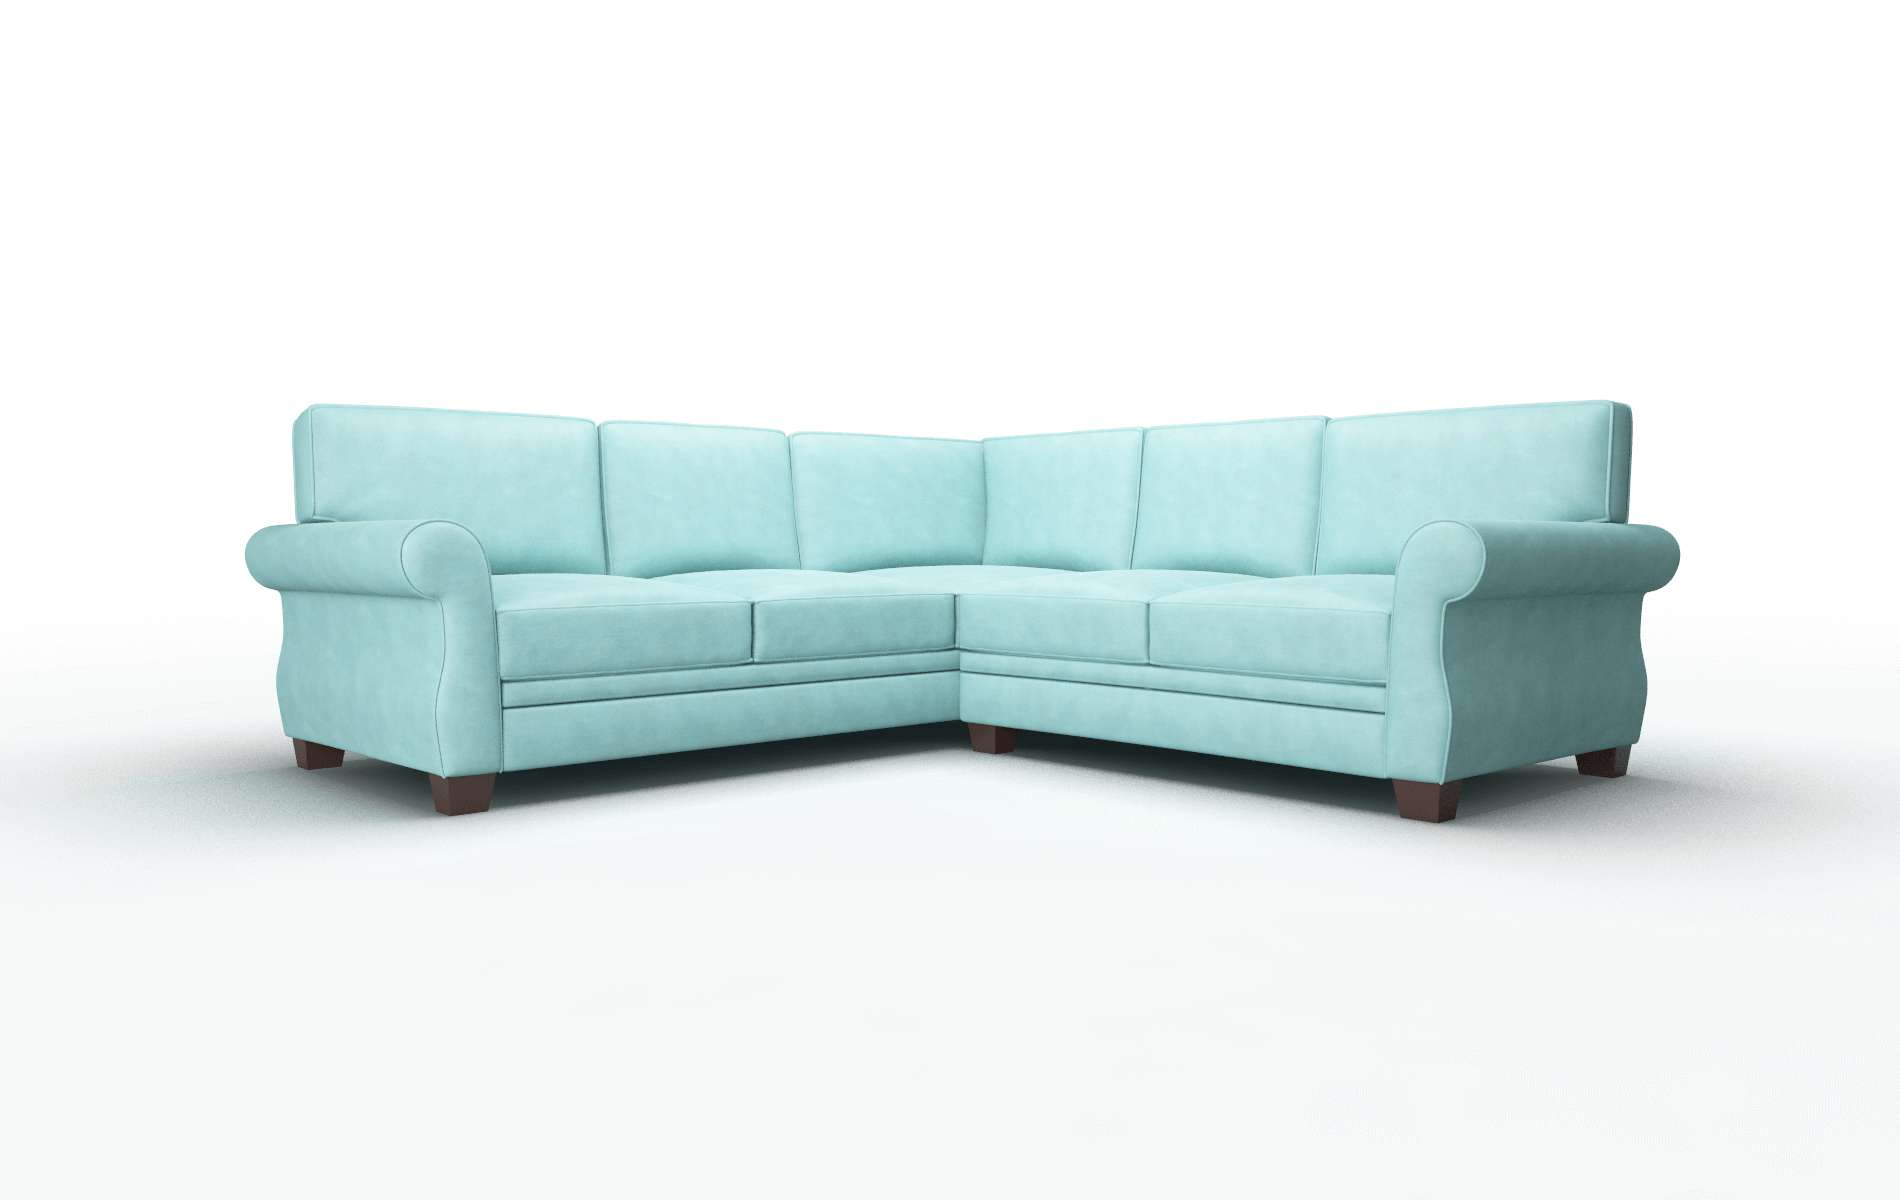 Rome Curious Turquoise Sectional espresso legs